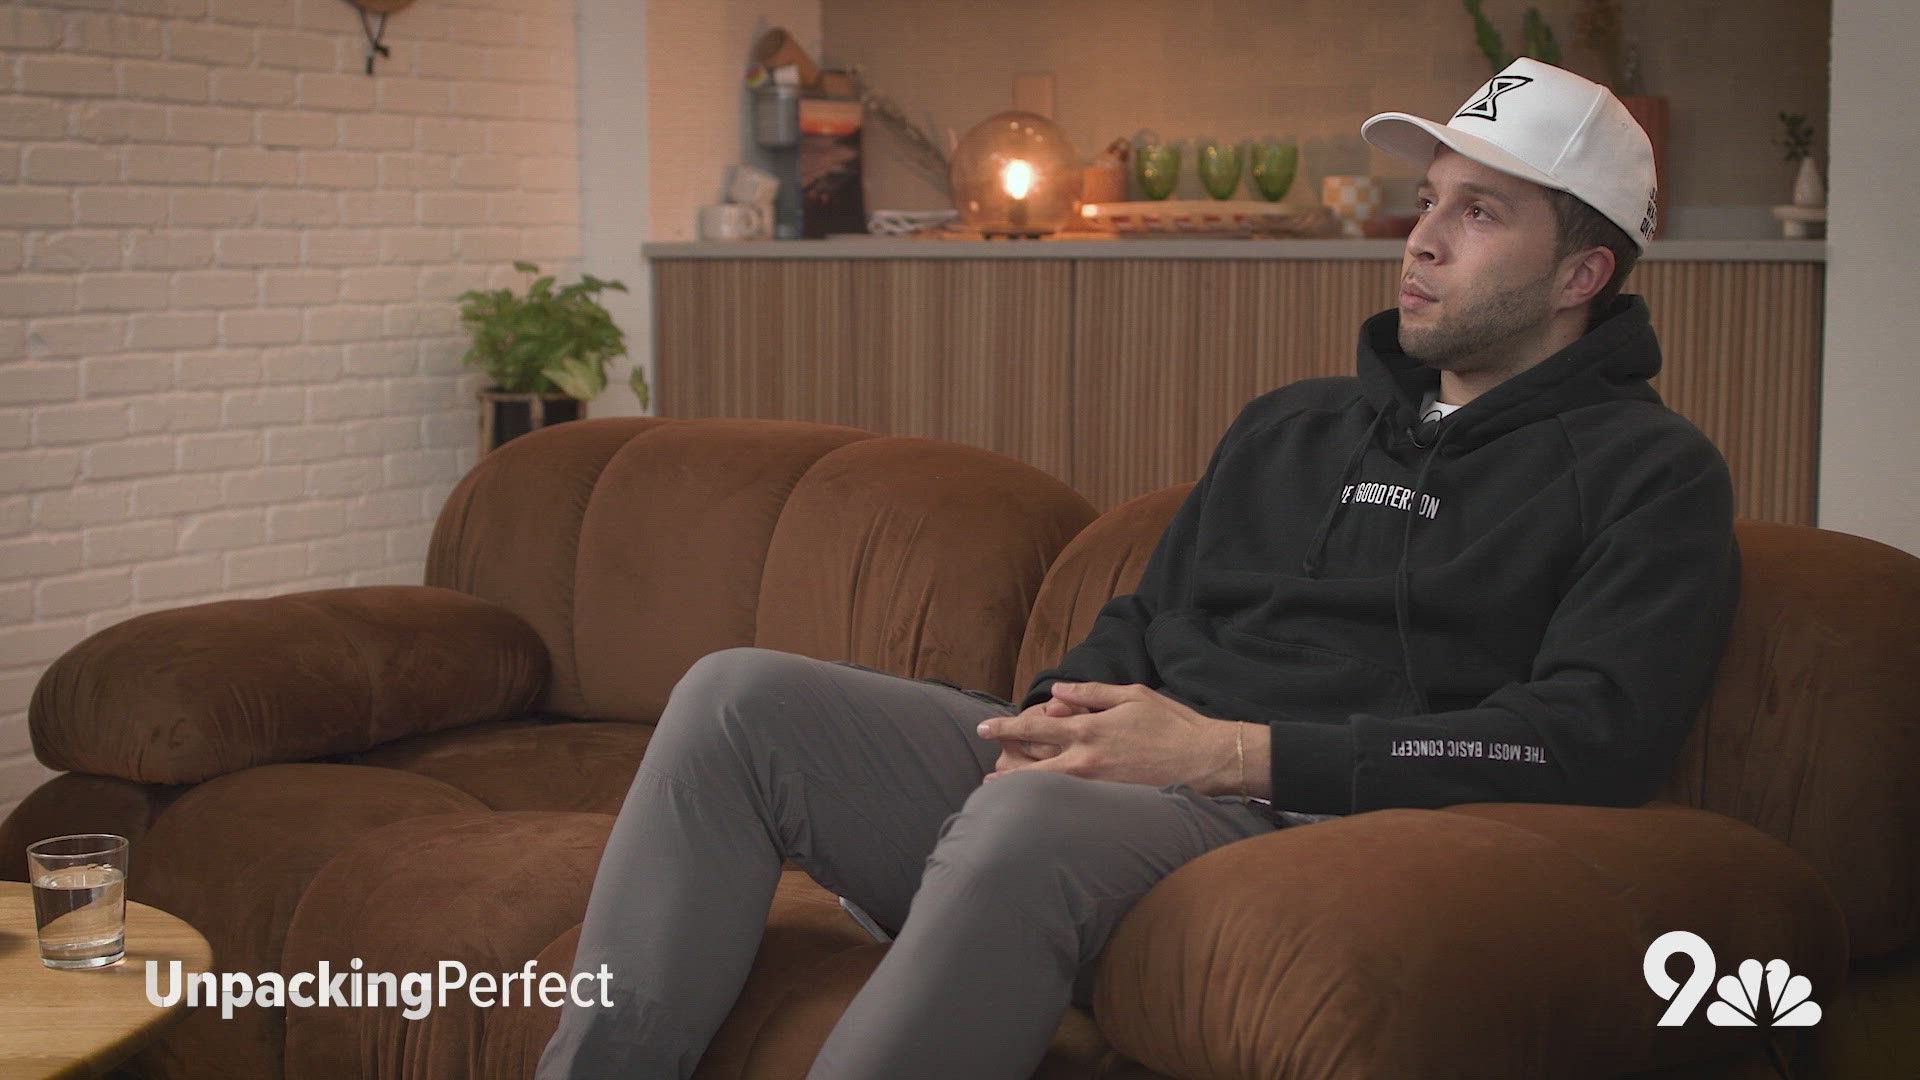 Darian recently sat down with 9NEWS and Unpacking Perfect to share his story of mental wellness, and how he has pushed aside the ideals of perfection.